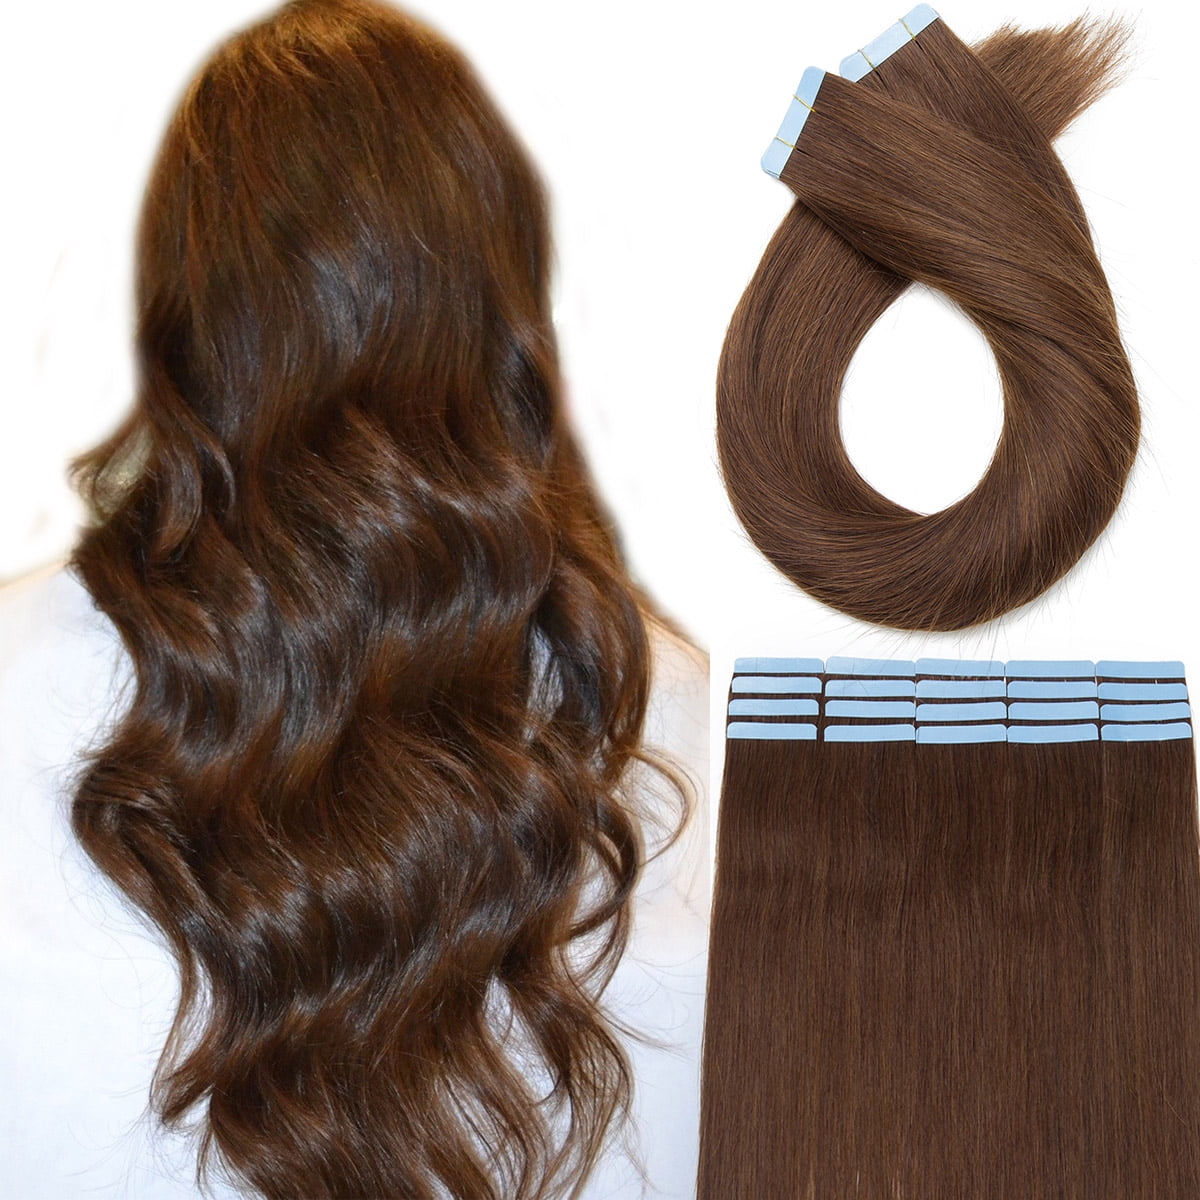 Set Back Of Full Head Brazilian Human Hair Extension Clips 16 32 Inches  Synthetic From Xxpfyf123, $6.11